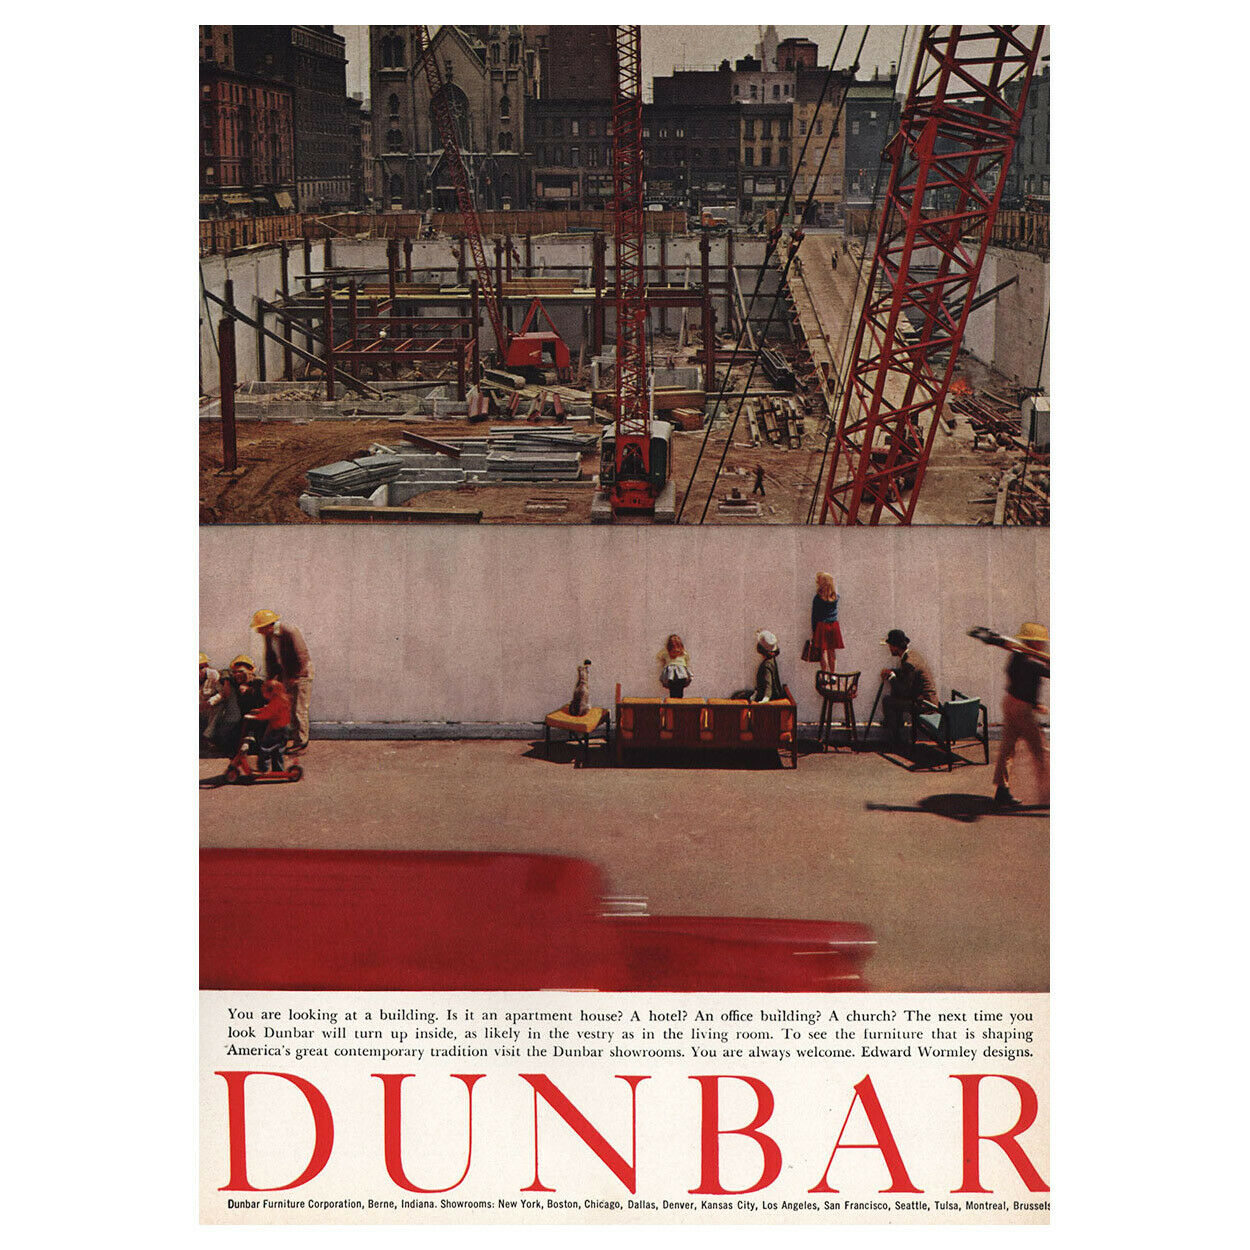 1959 Dunbar Furniture: You Are Looking At A Building Vintage Print Ad